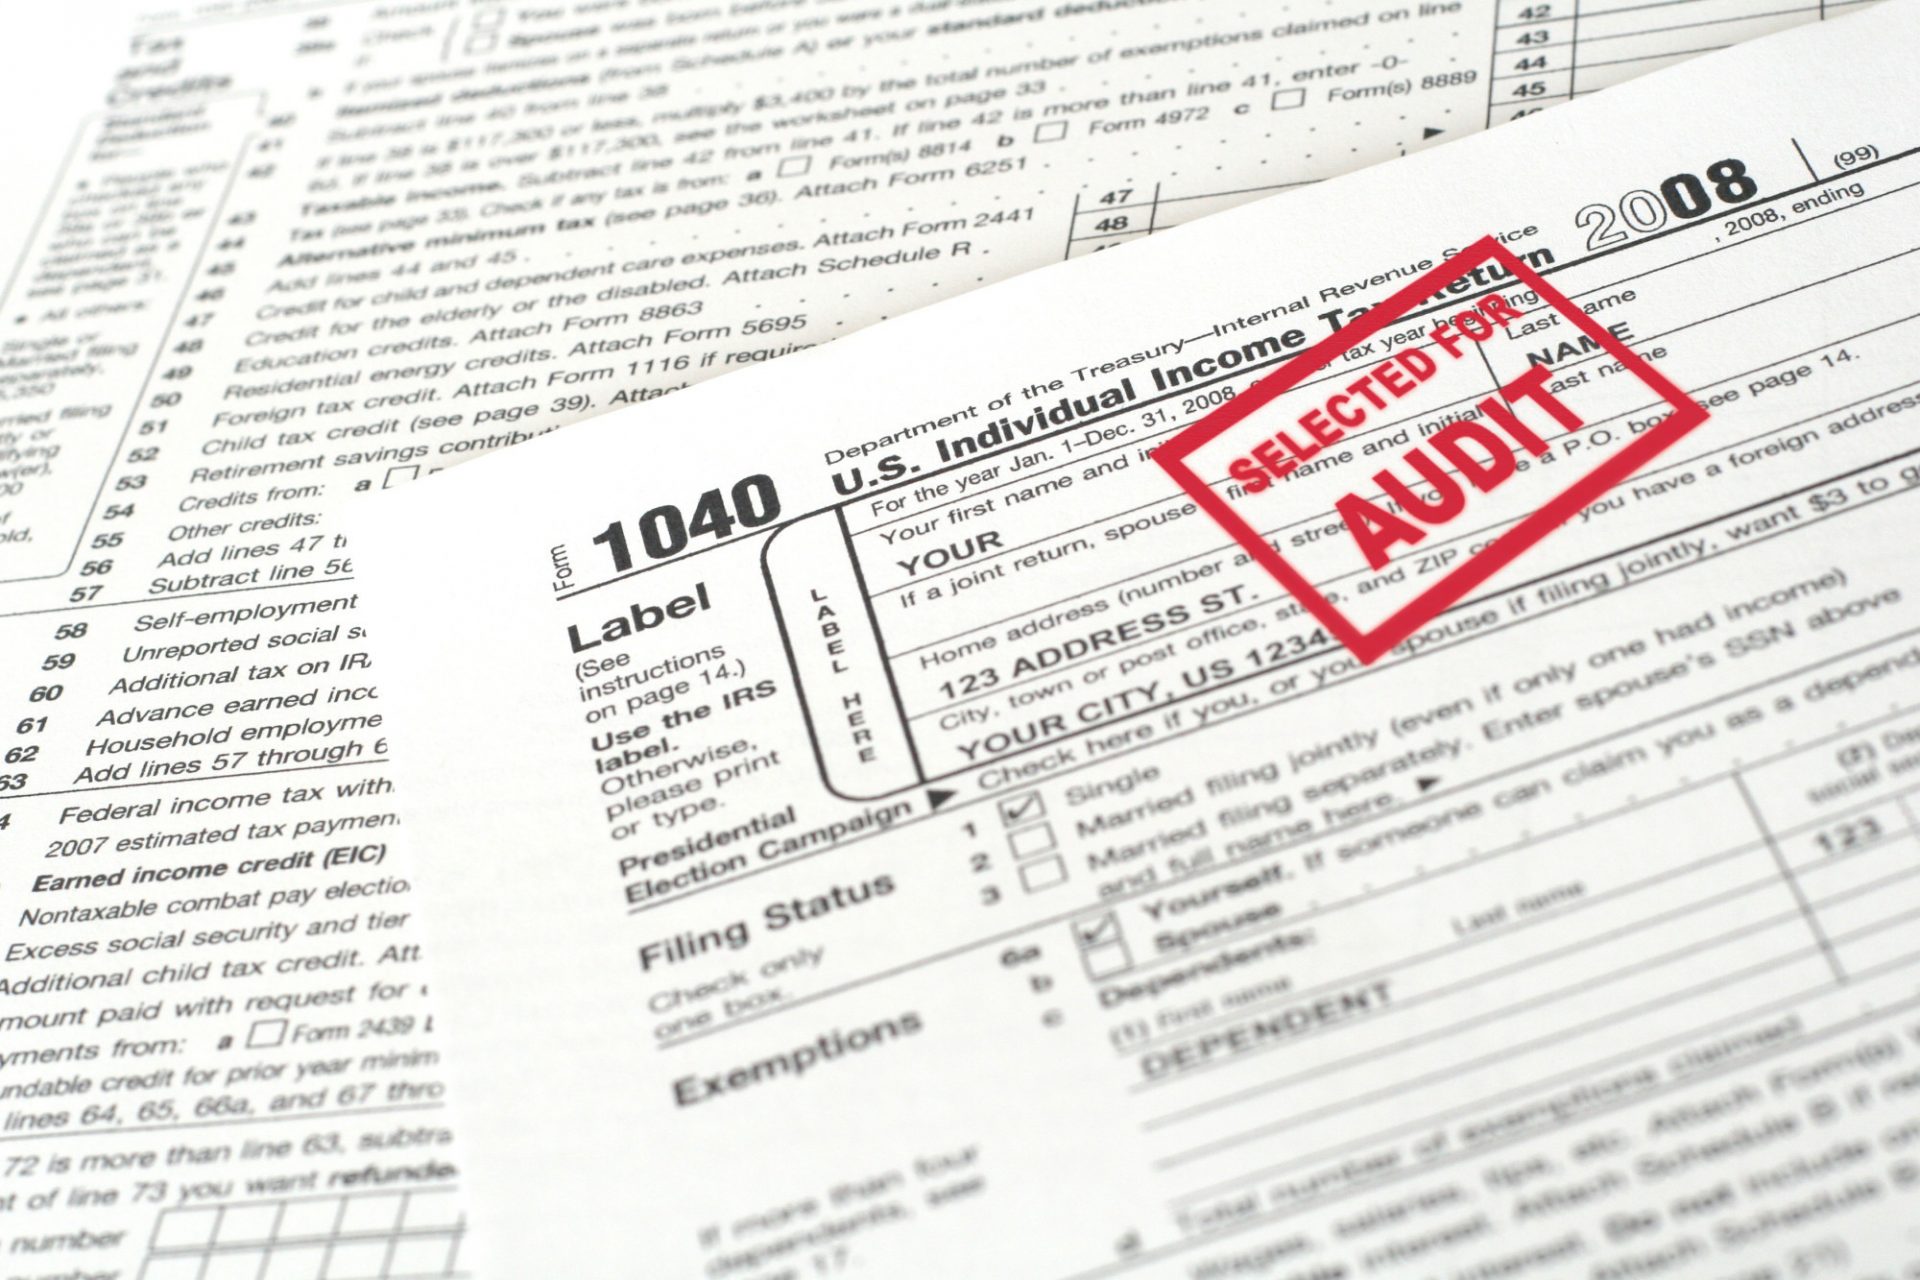 What Should I Do in the Event of an IRS Tax Audit?